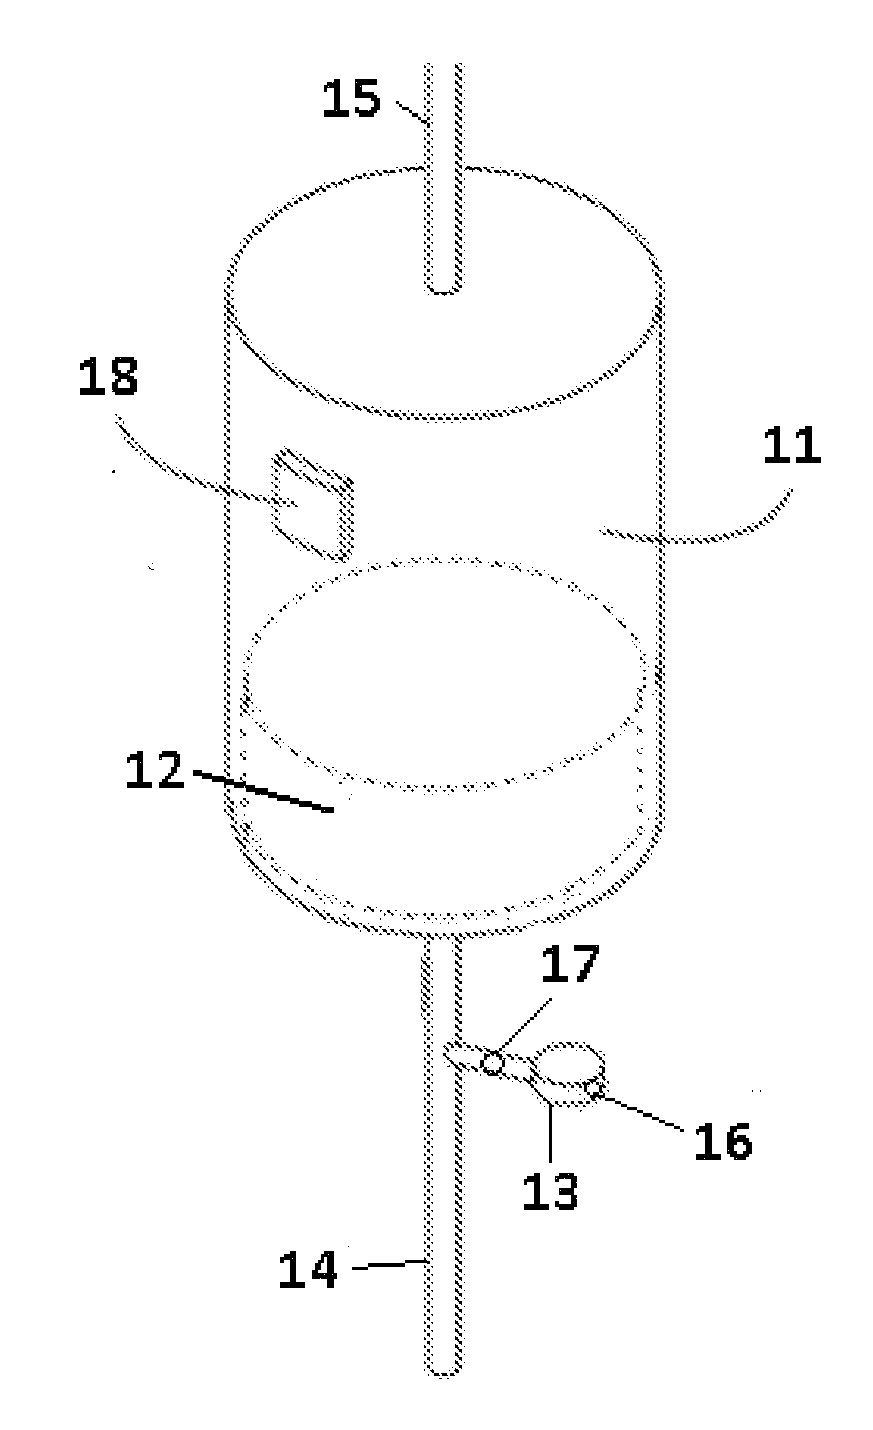 Replenisihing urease in dialysis systems using a urease introducer